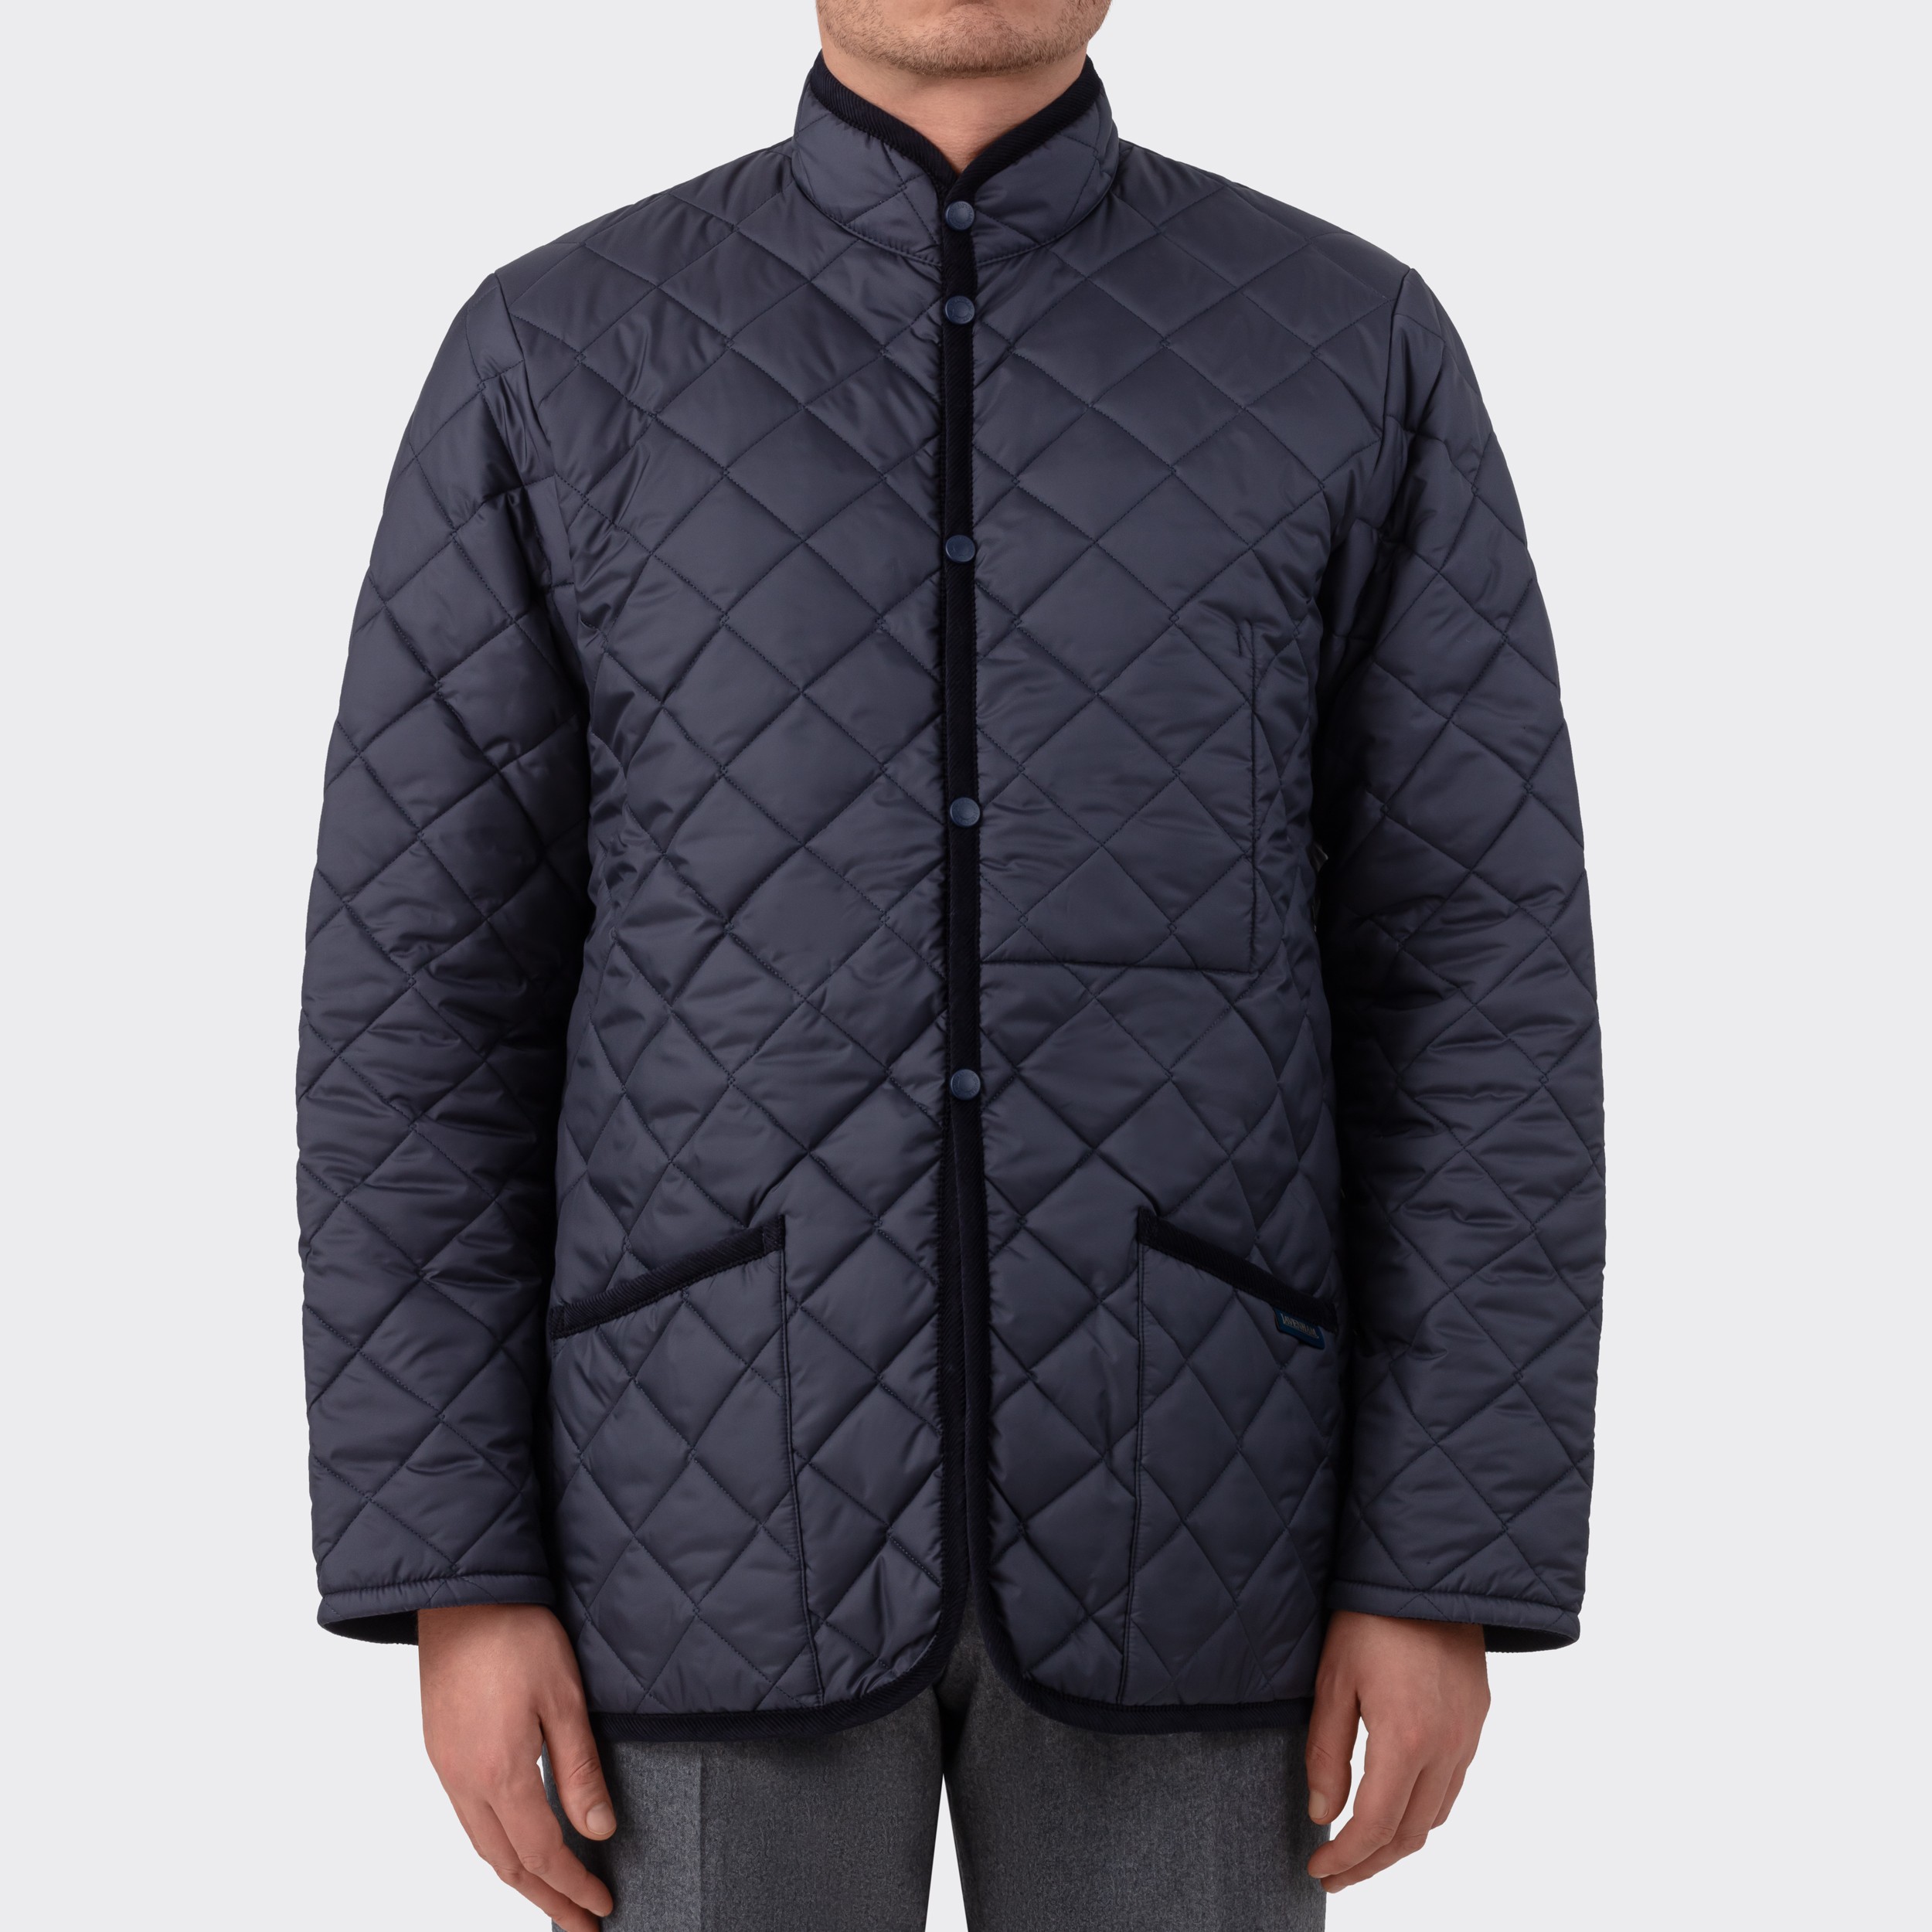 Lavenham : Only for BEIGE | Band Collar Quilted Jacket : Navy